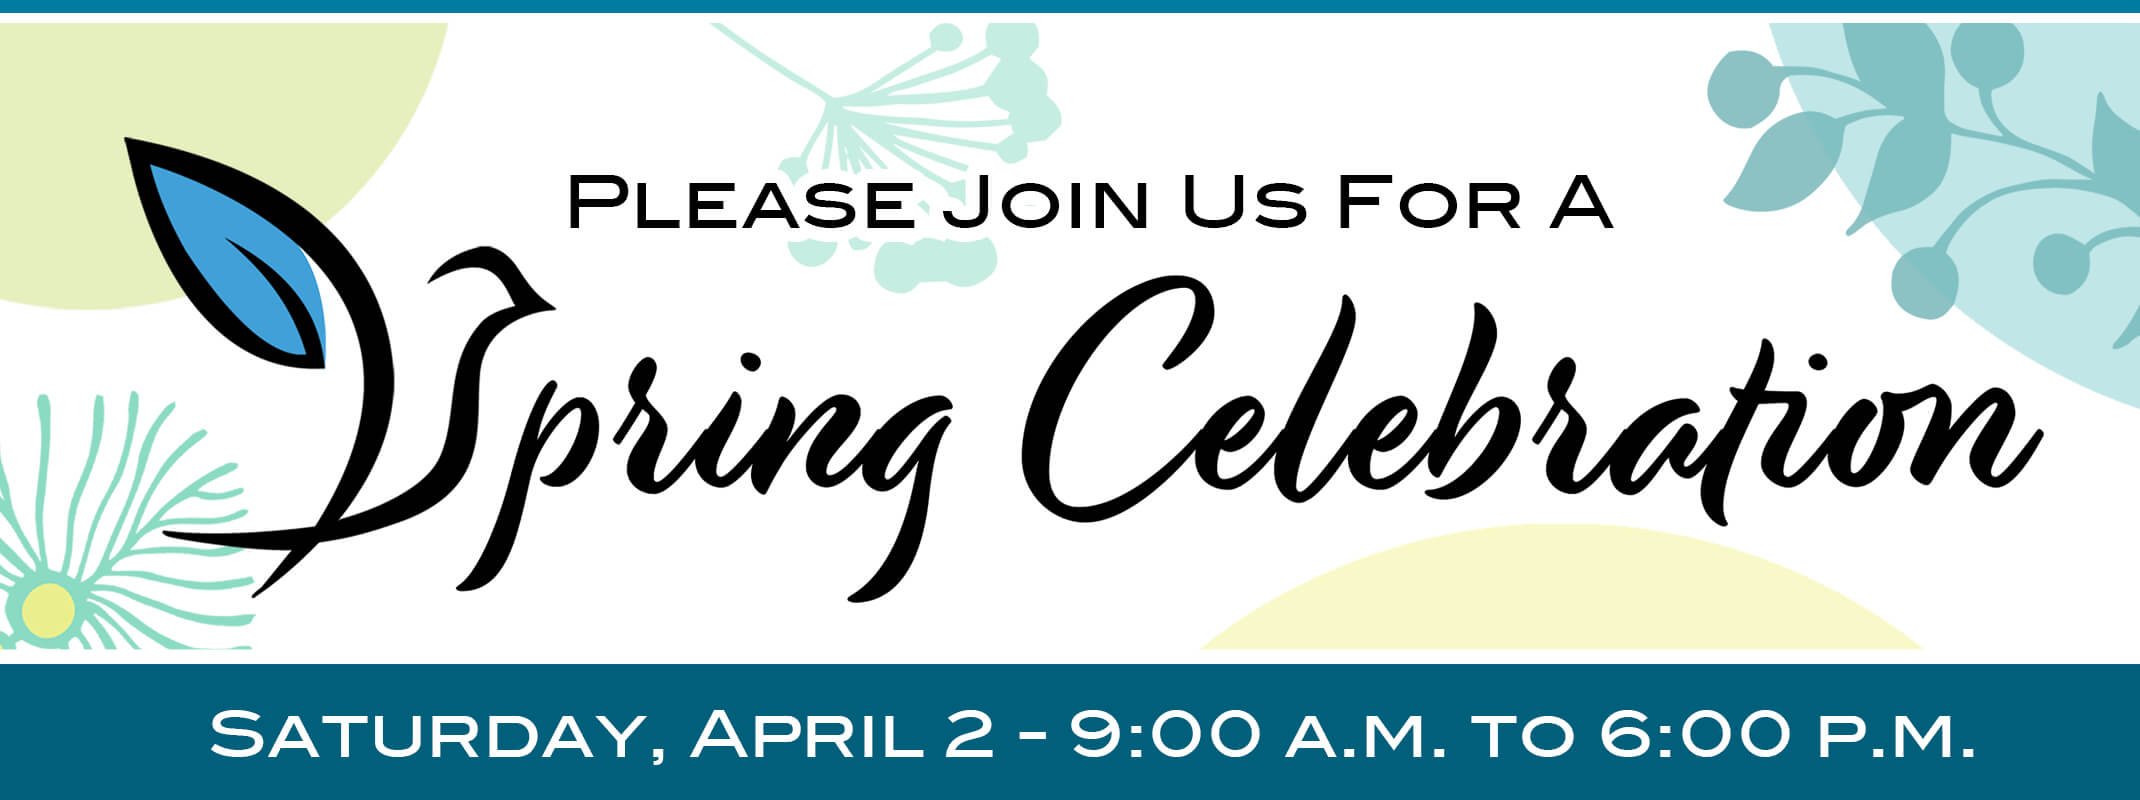 please join us for a spring celebration saturday, april 2 at 9:00 a.m. to 6:00 p.m. header